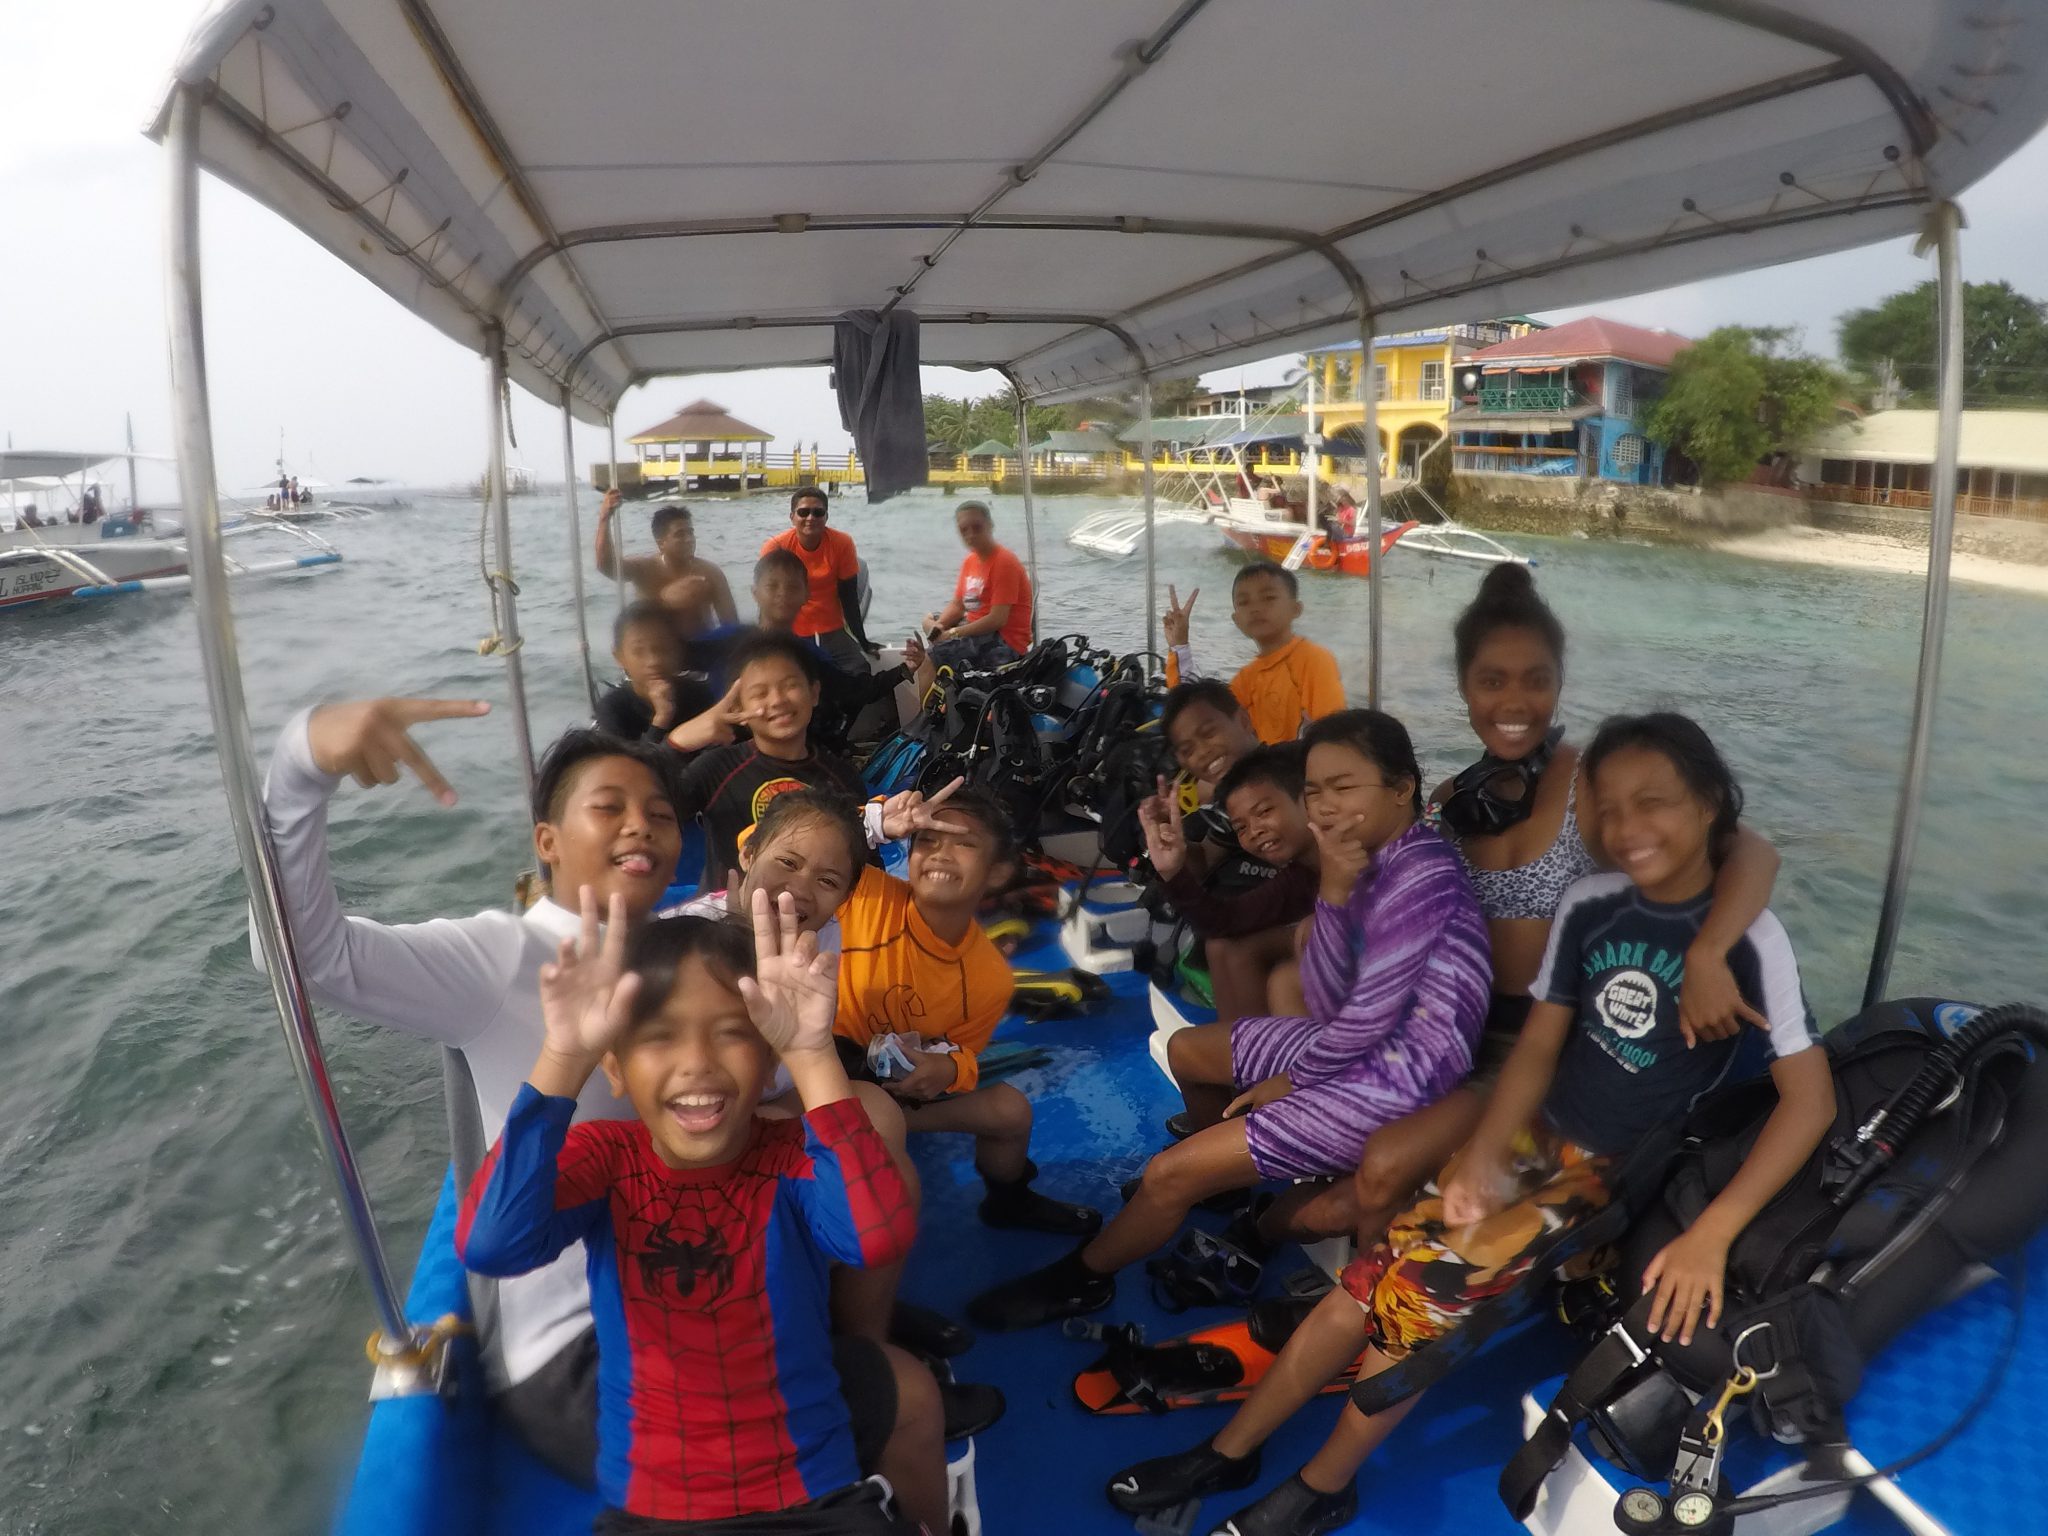 Basdiot Elementary School - Moalboal - Philippines - PADI Open Water Diver course